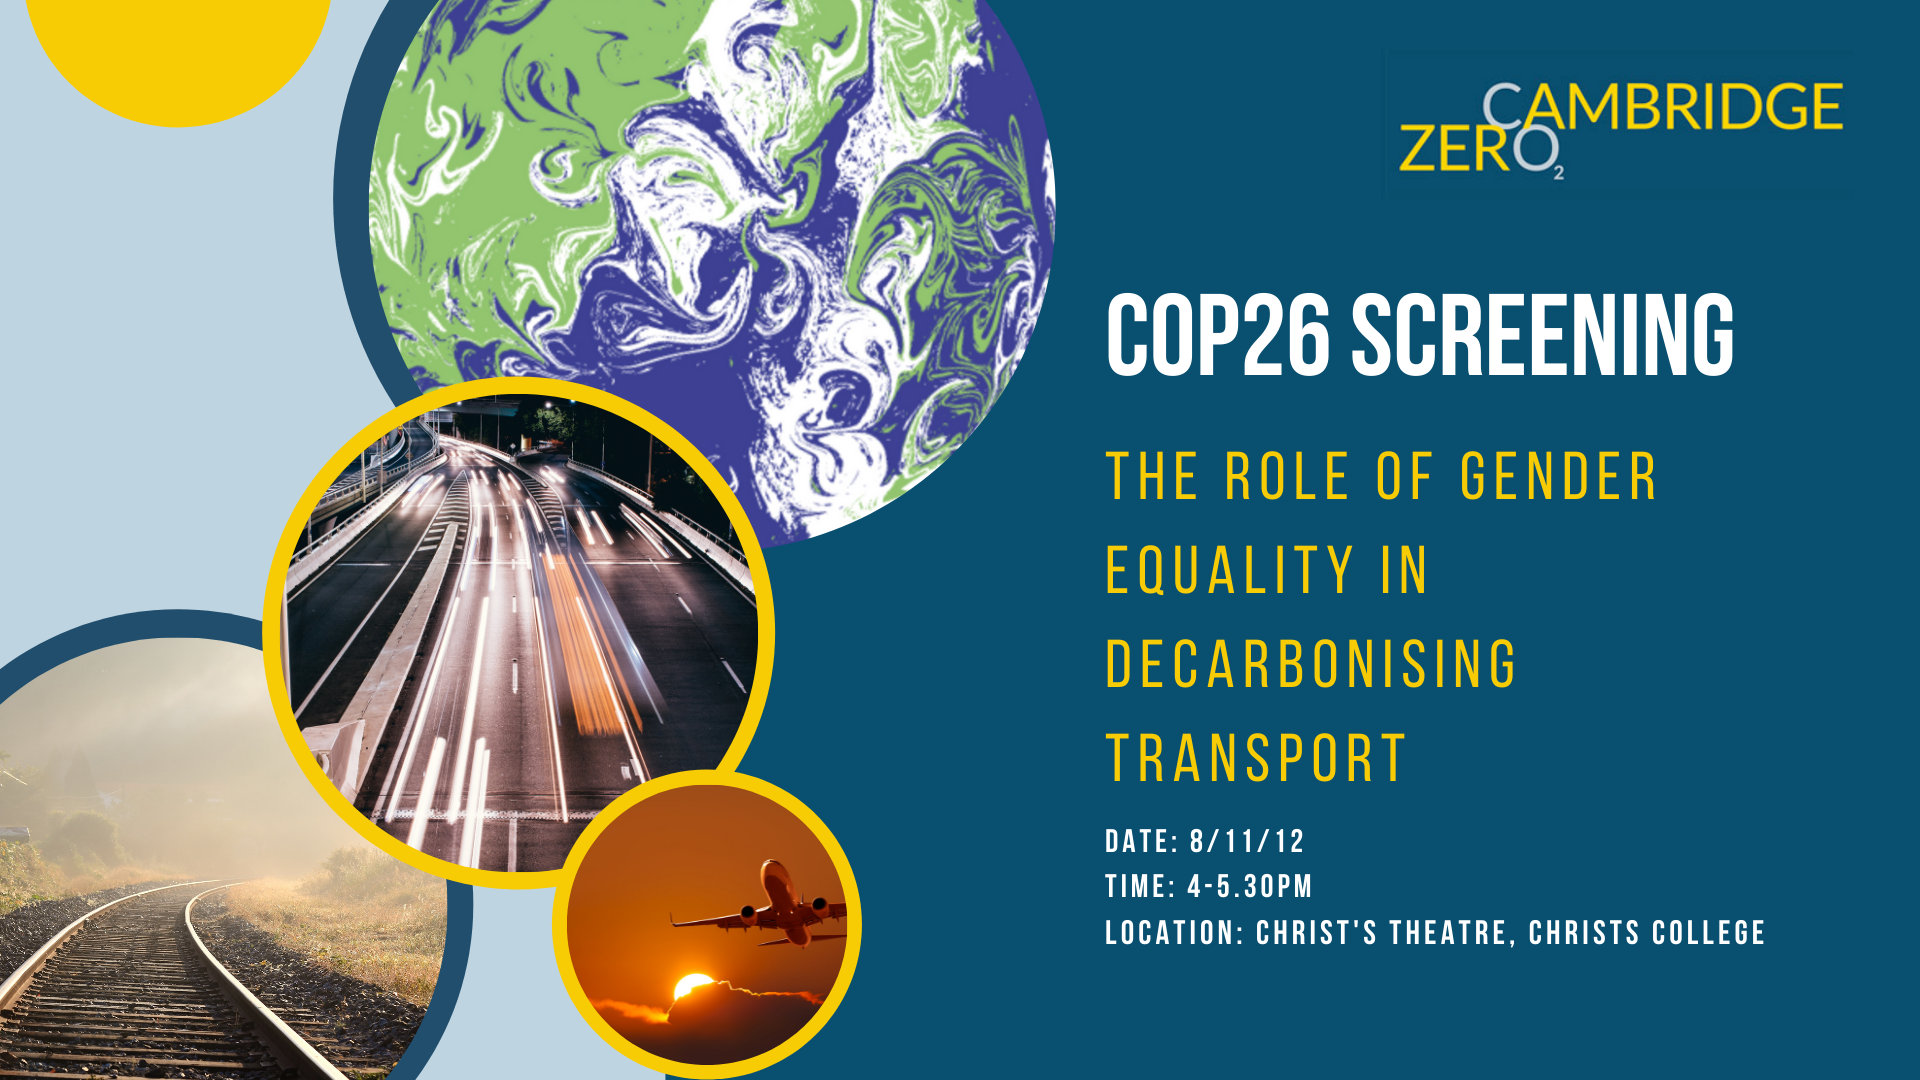 COP26 Screening: the role of gender equality in decarbonising transport